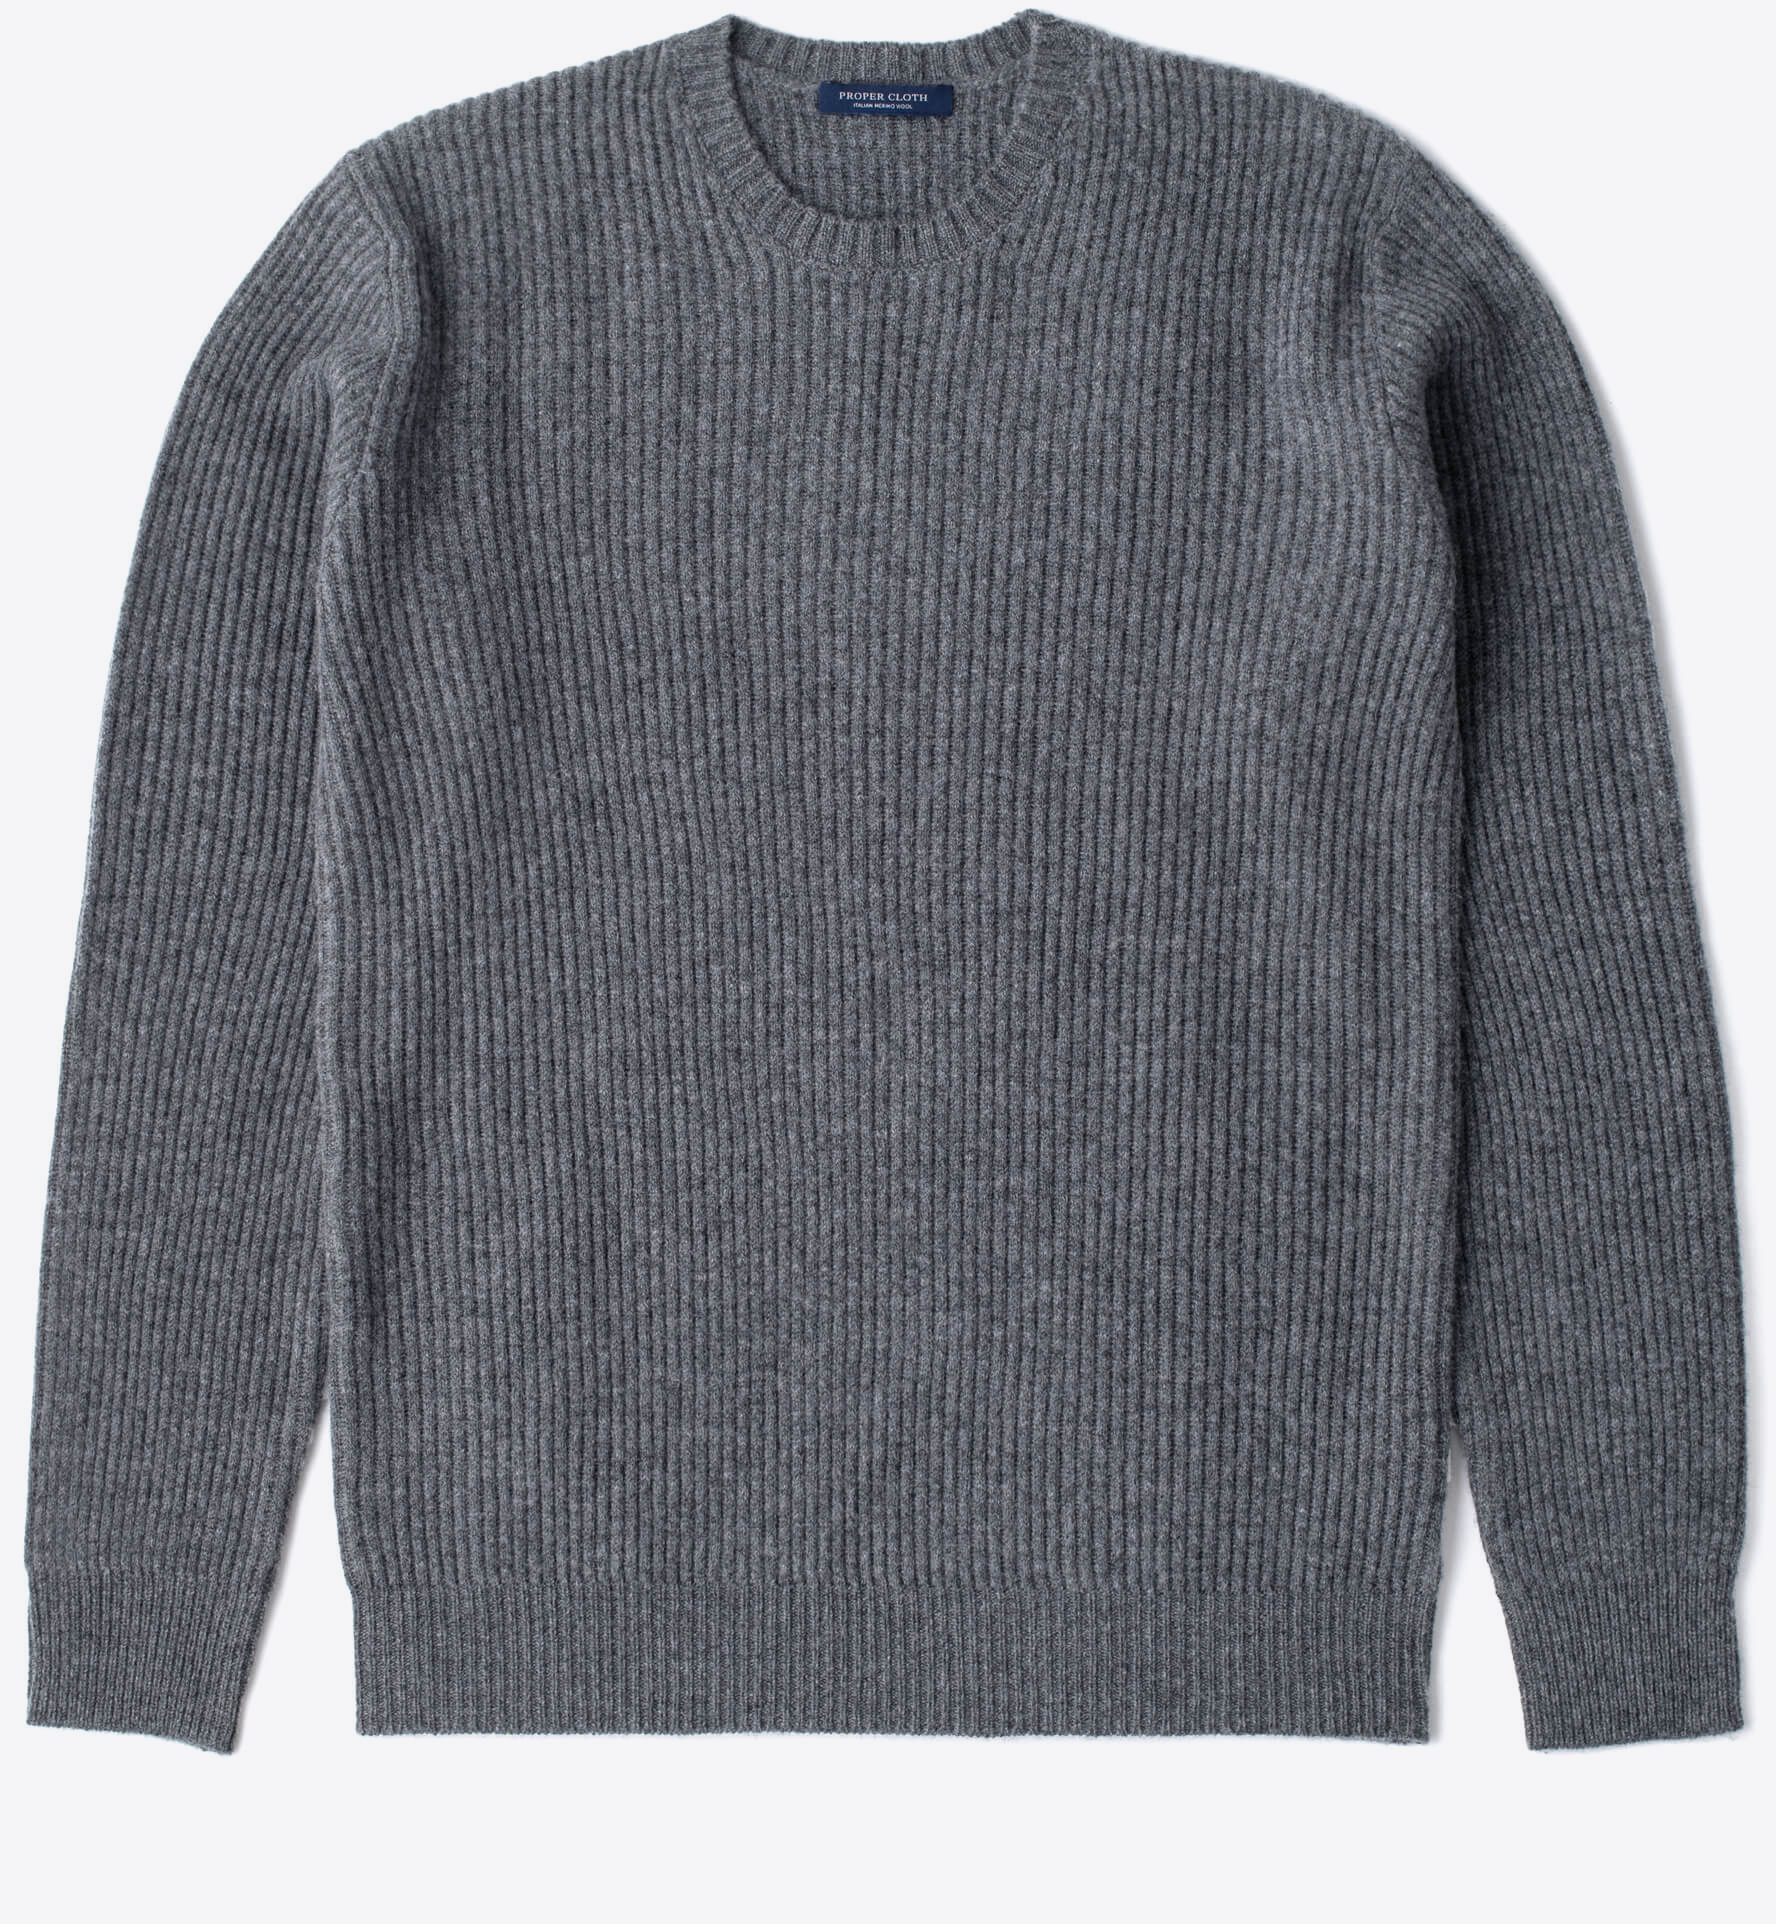 Grey Ribbed Wool and Cashmere Sweater by Proper Cloth